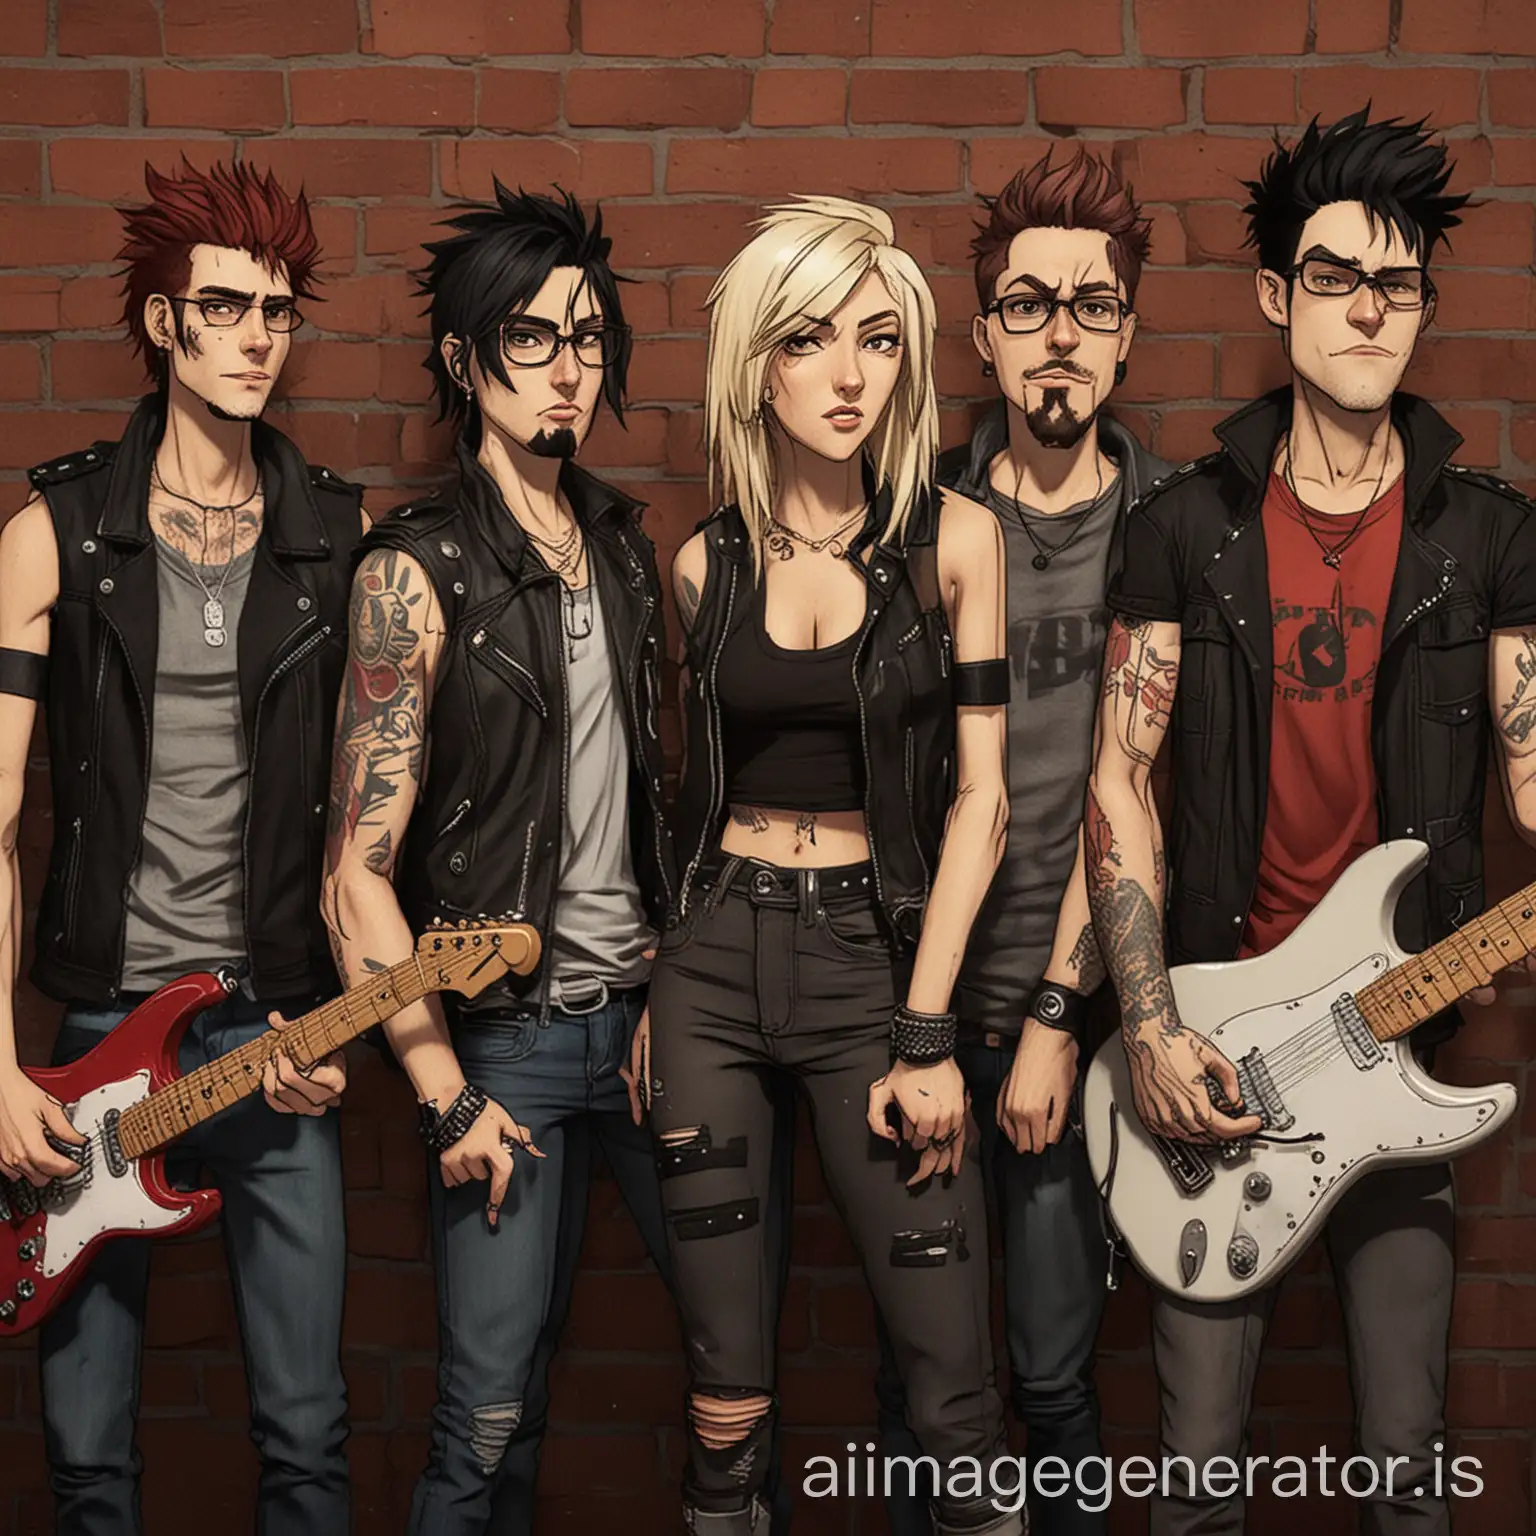 Edgy-Animated-Modern-Rock-Band-with-Female-Lead-Singer